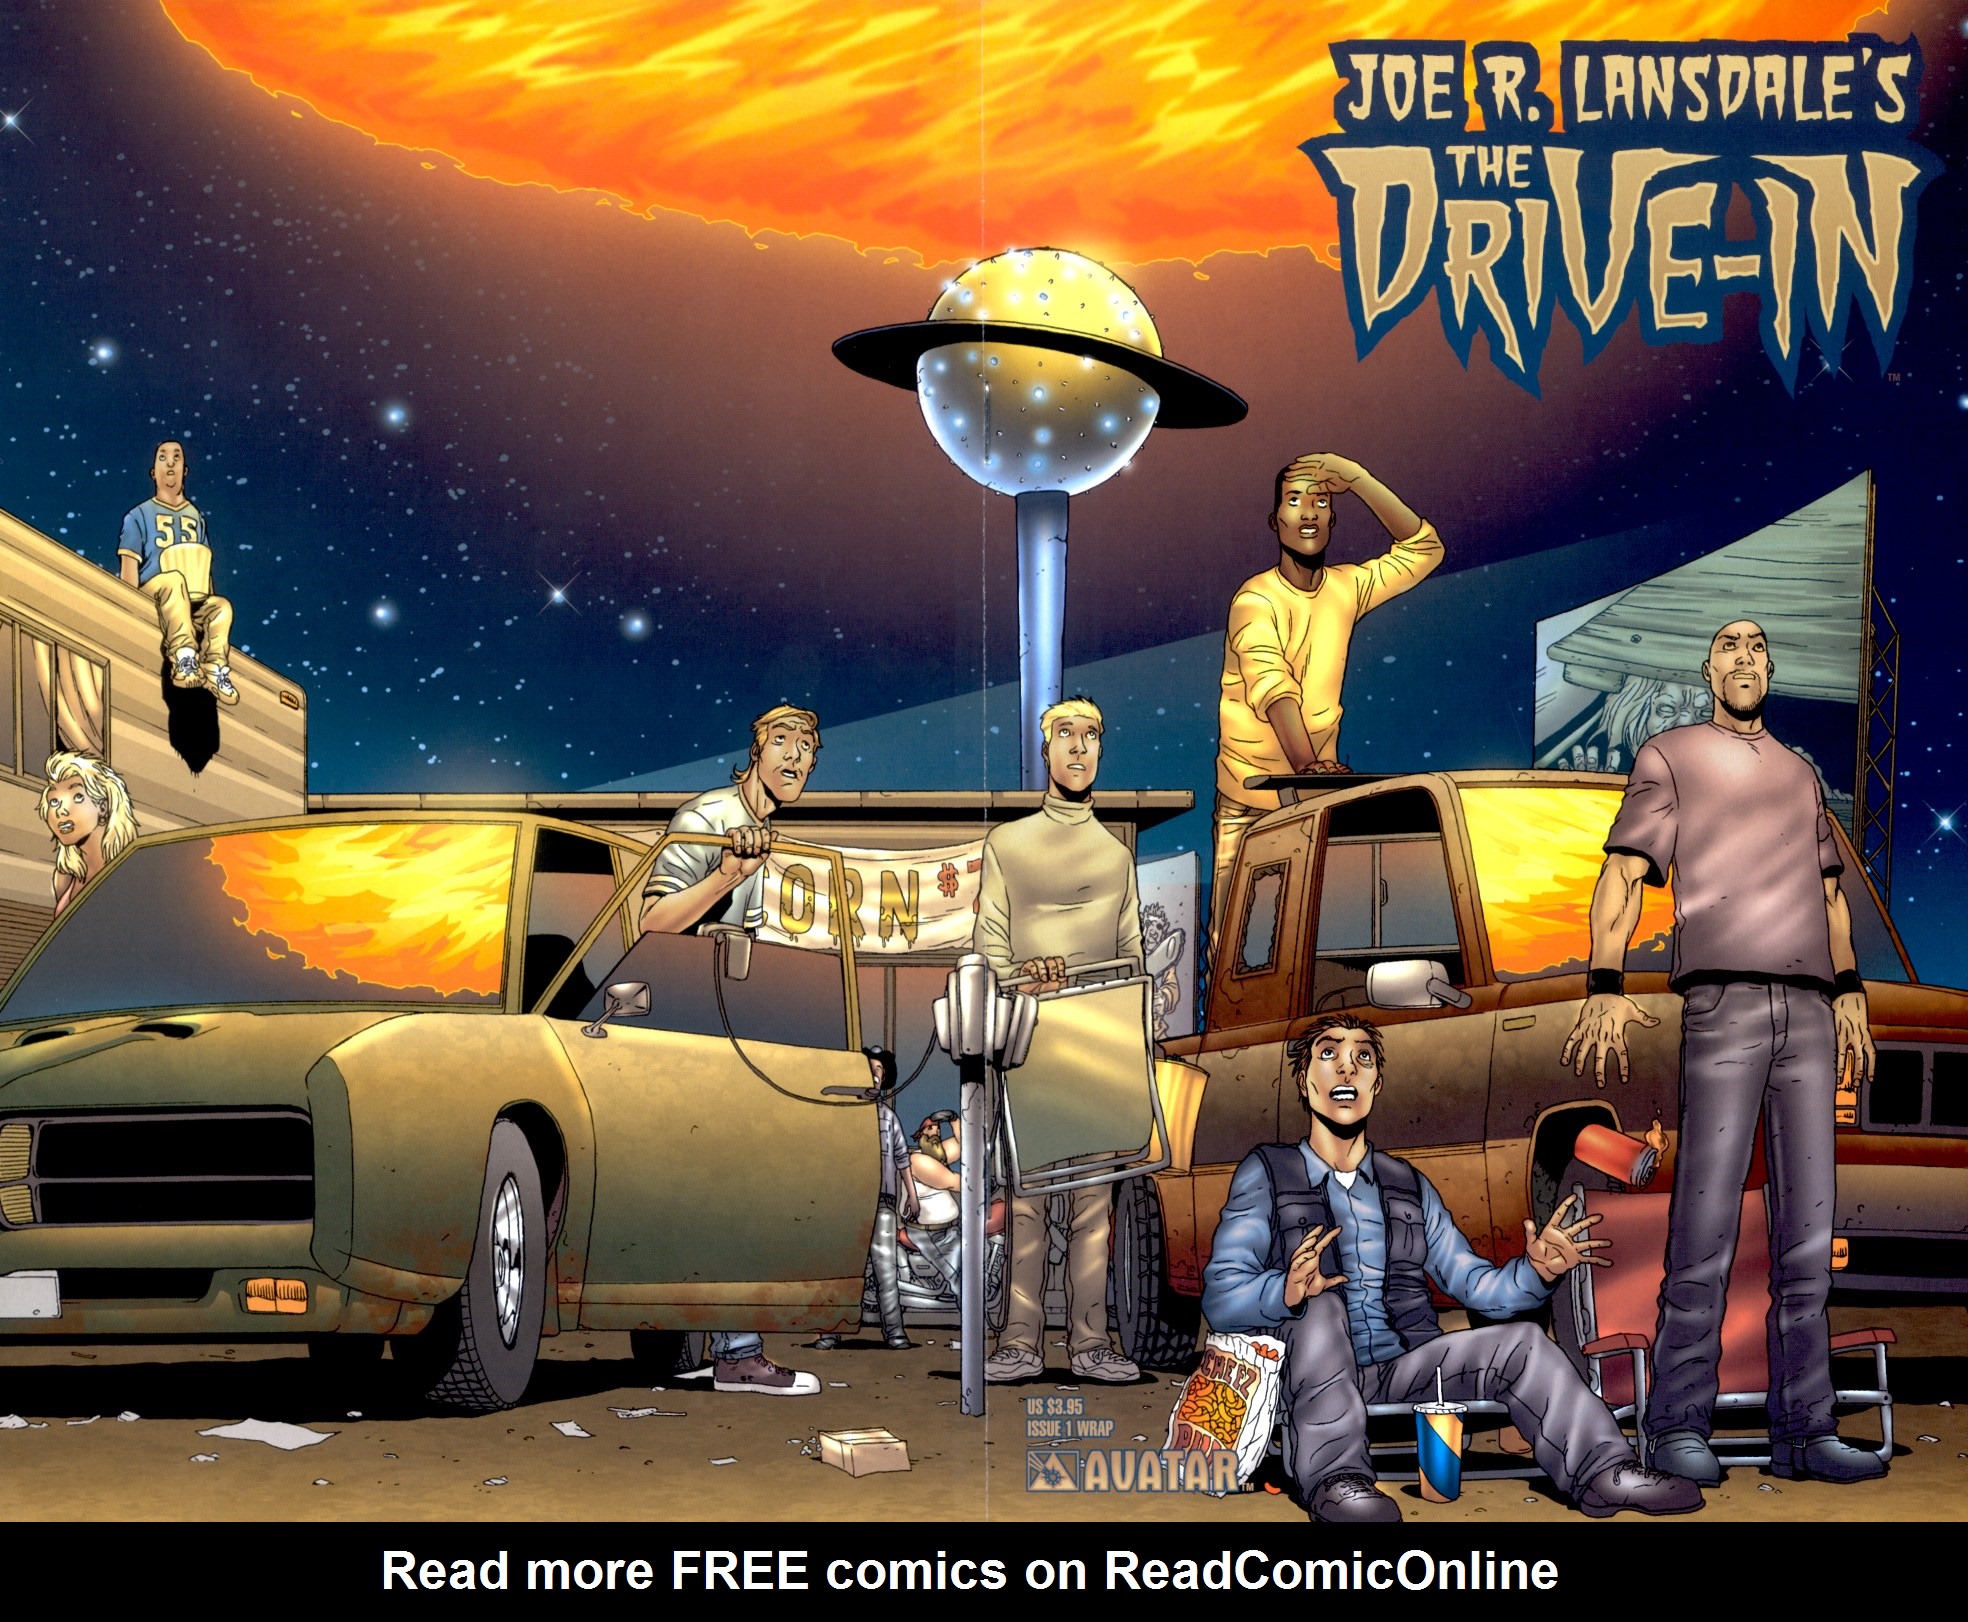 Read online Joe R. Lansdale's The Drive-In comic -  Issue #1 - 1